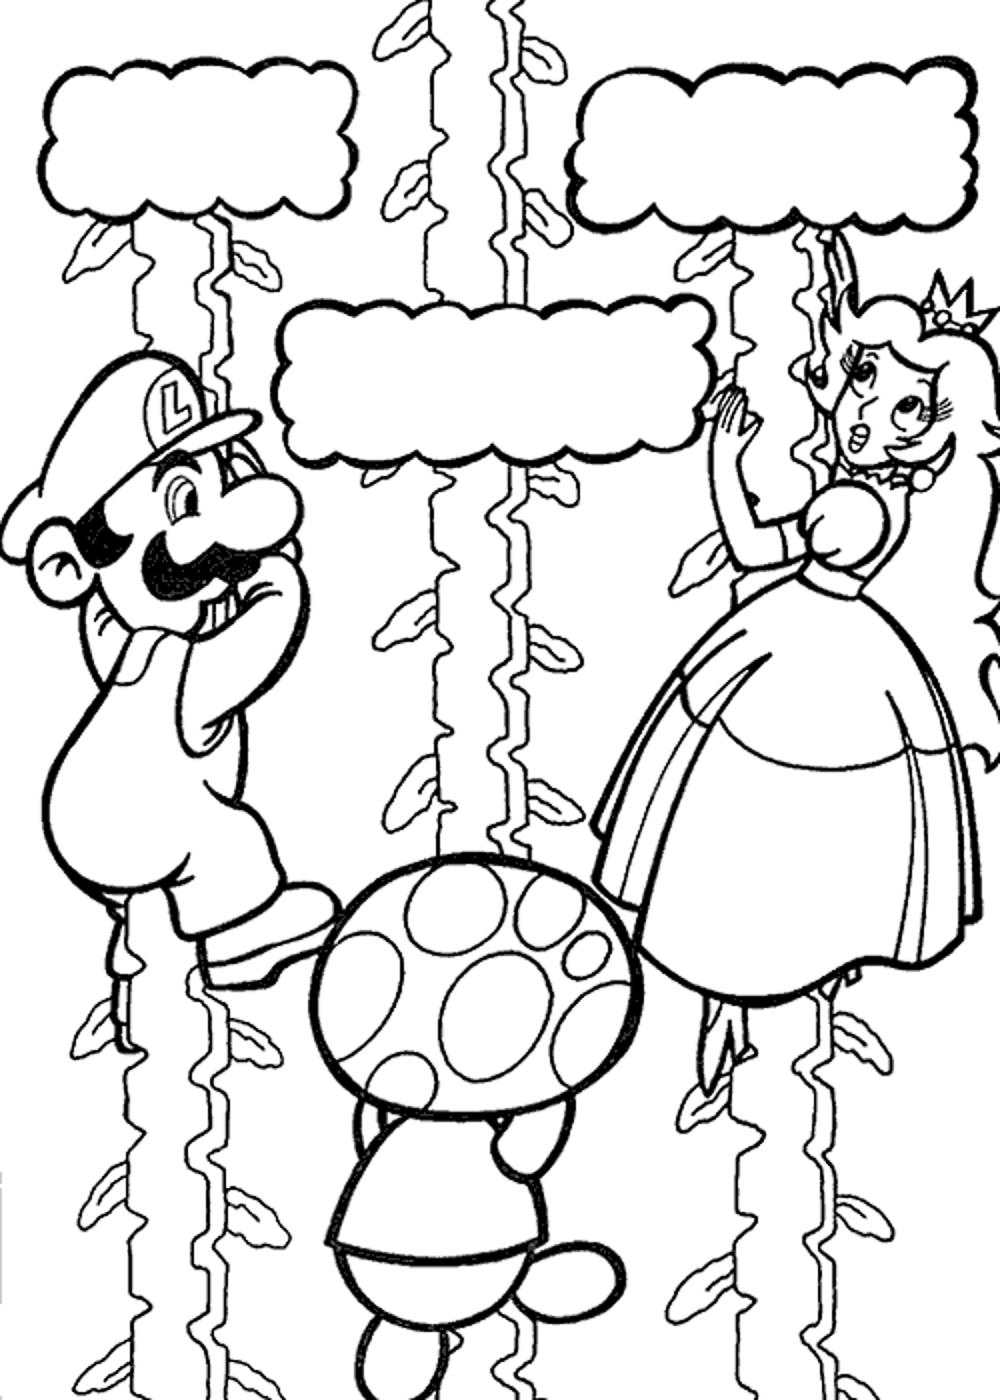 Download super-mario-galaxy-coloring-pages - Best Apps For Kids